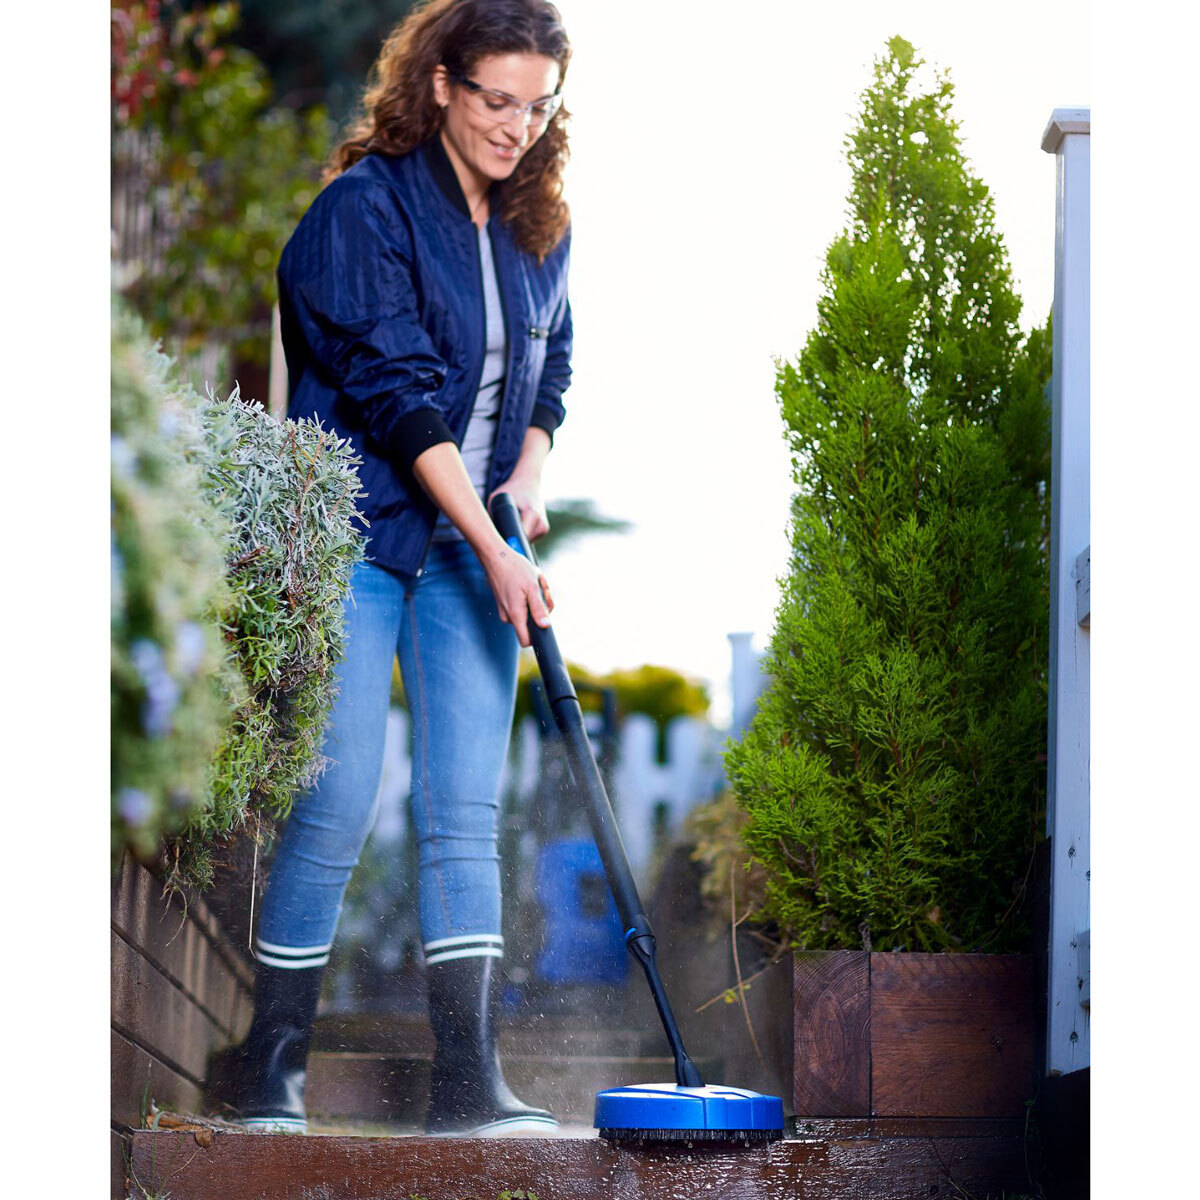 Lifestyle image of pressure washer in use